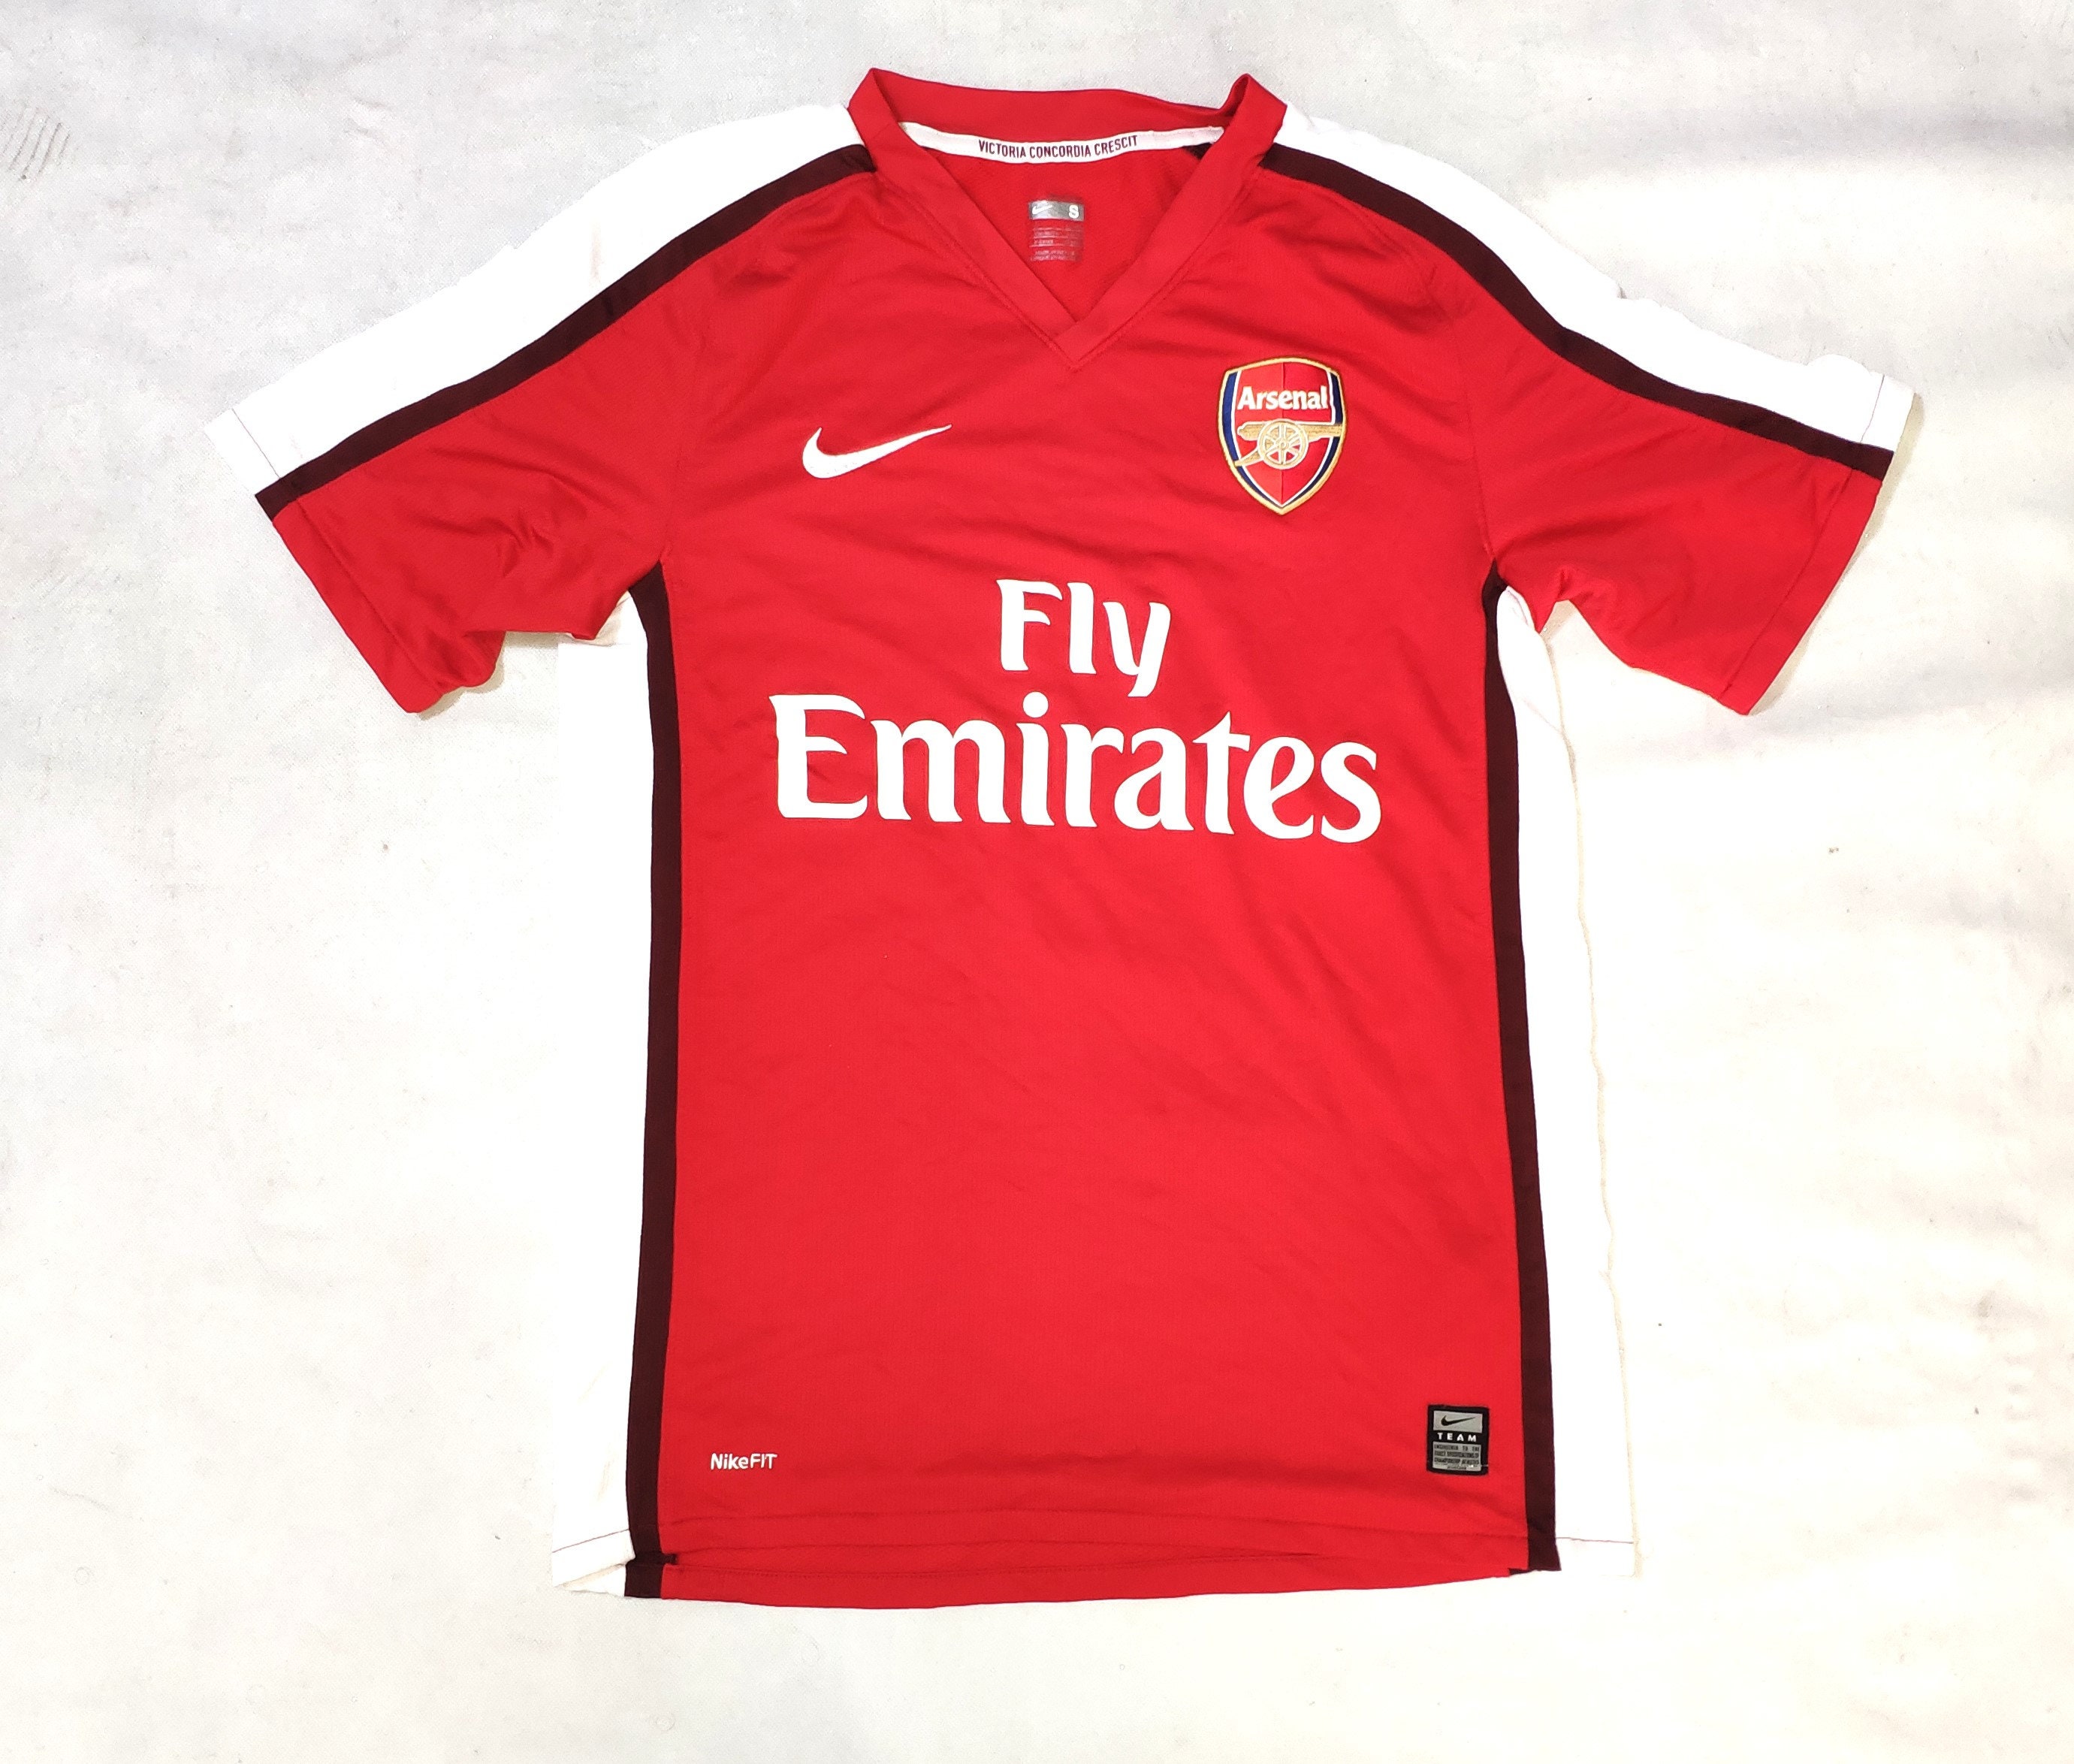 Volwassen Herziening moord Arsenal Official Football Soccer Jersey by Nike Size S - Etsy